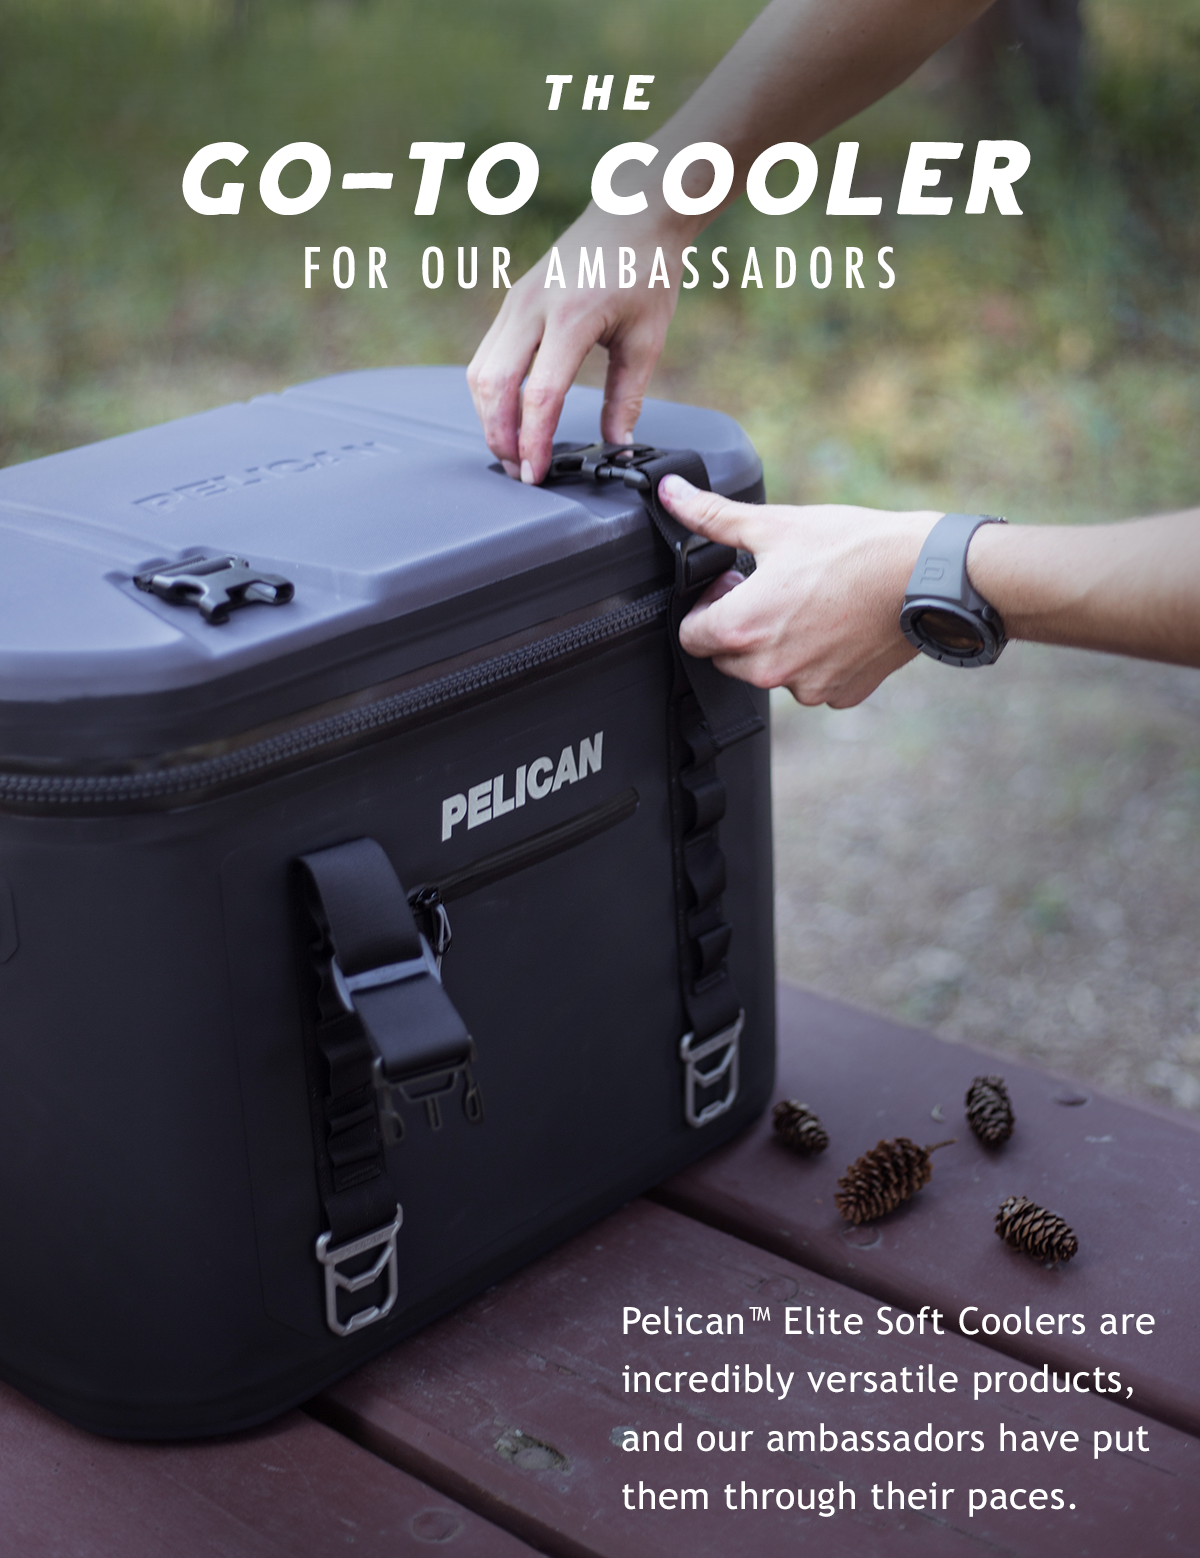 Why Our Brand Ambassadors Choose the Pelican™ Elite Soft Cooler